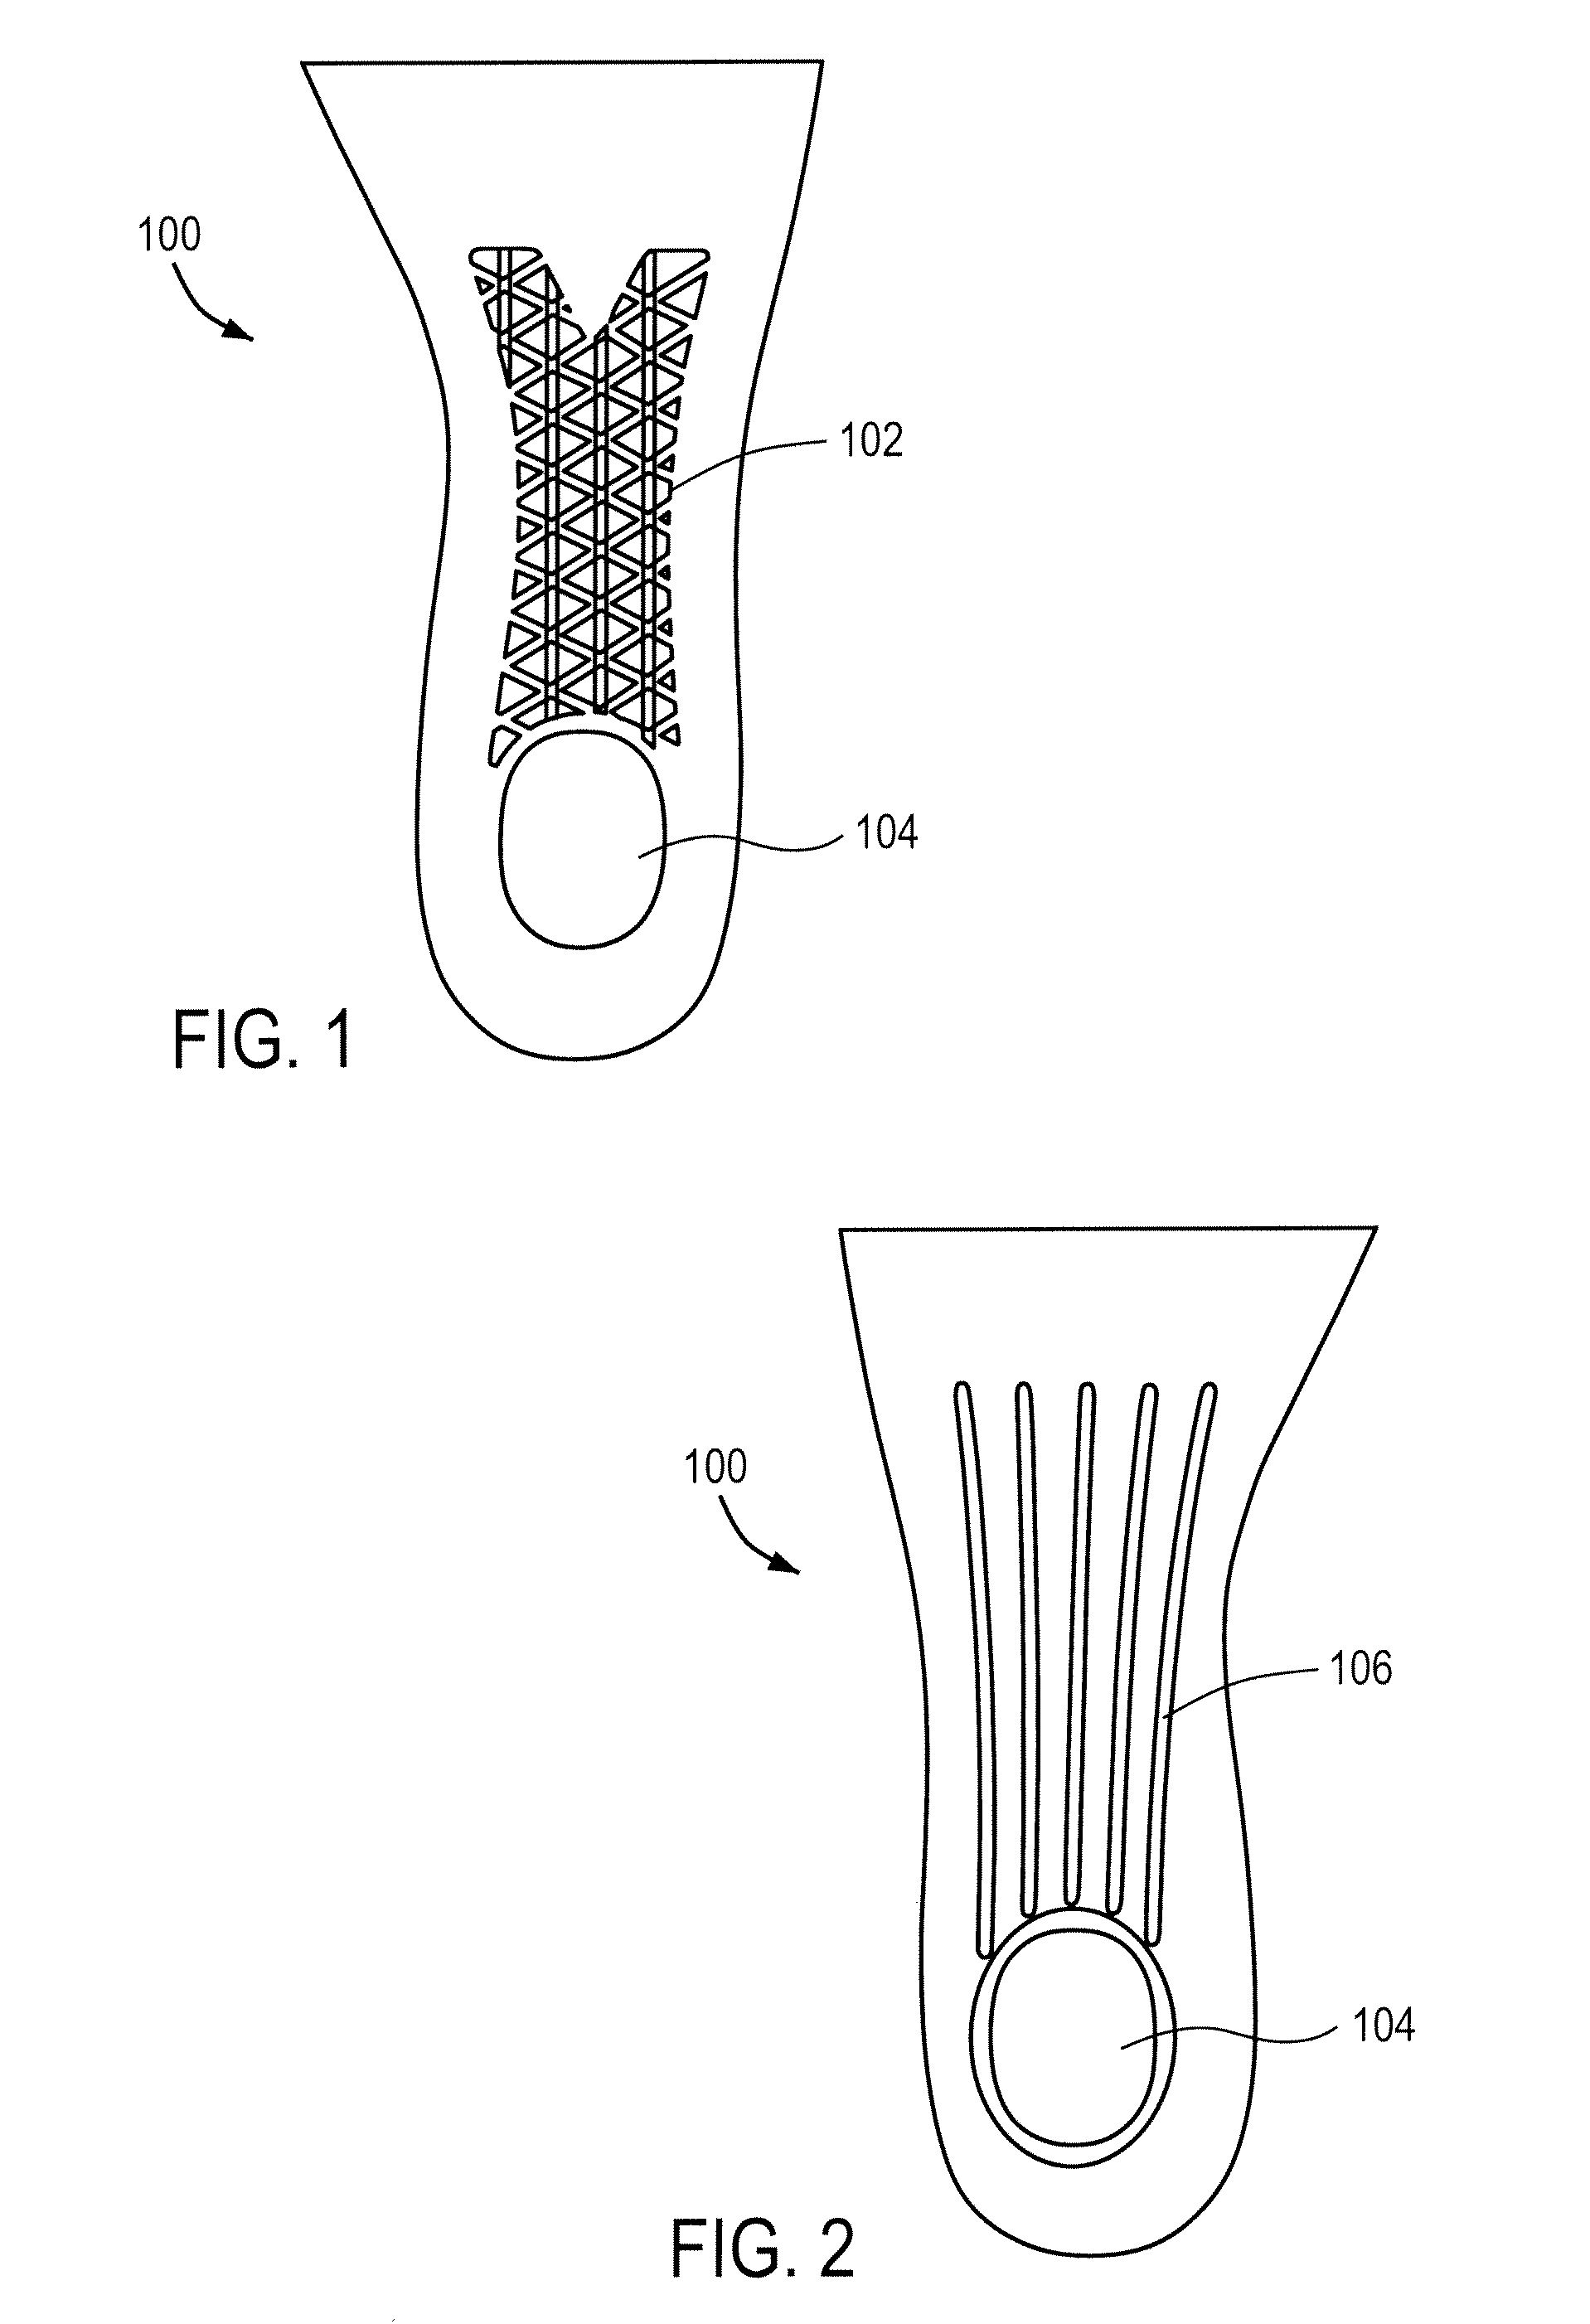 Footwear Sole with Honeycomb Reinforcement Shank, Fabric Layer, and Polymer Components